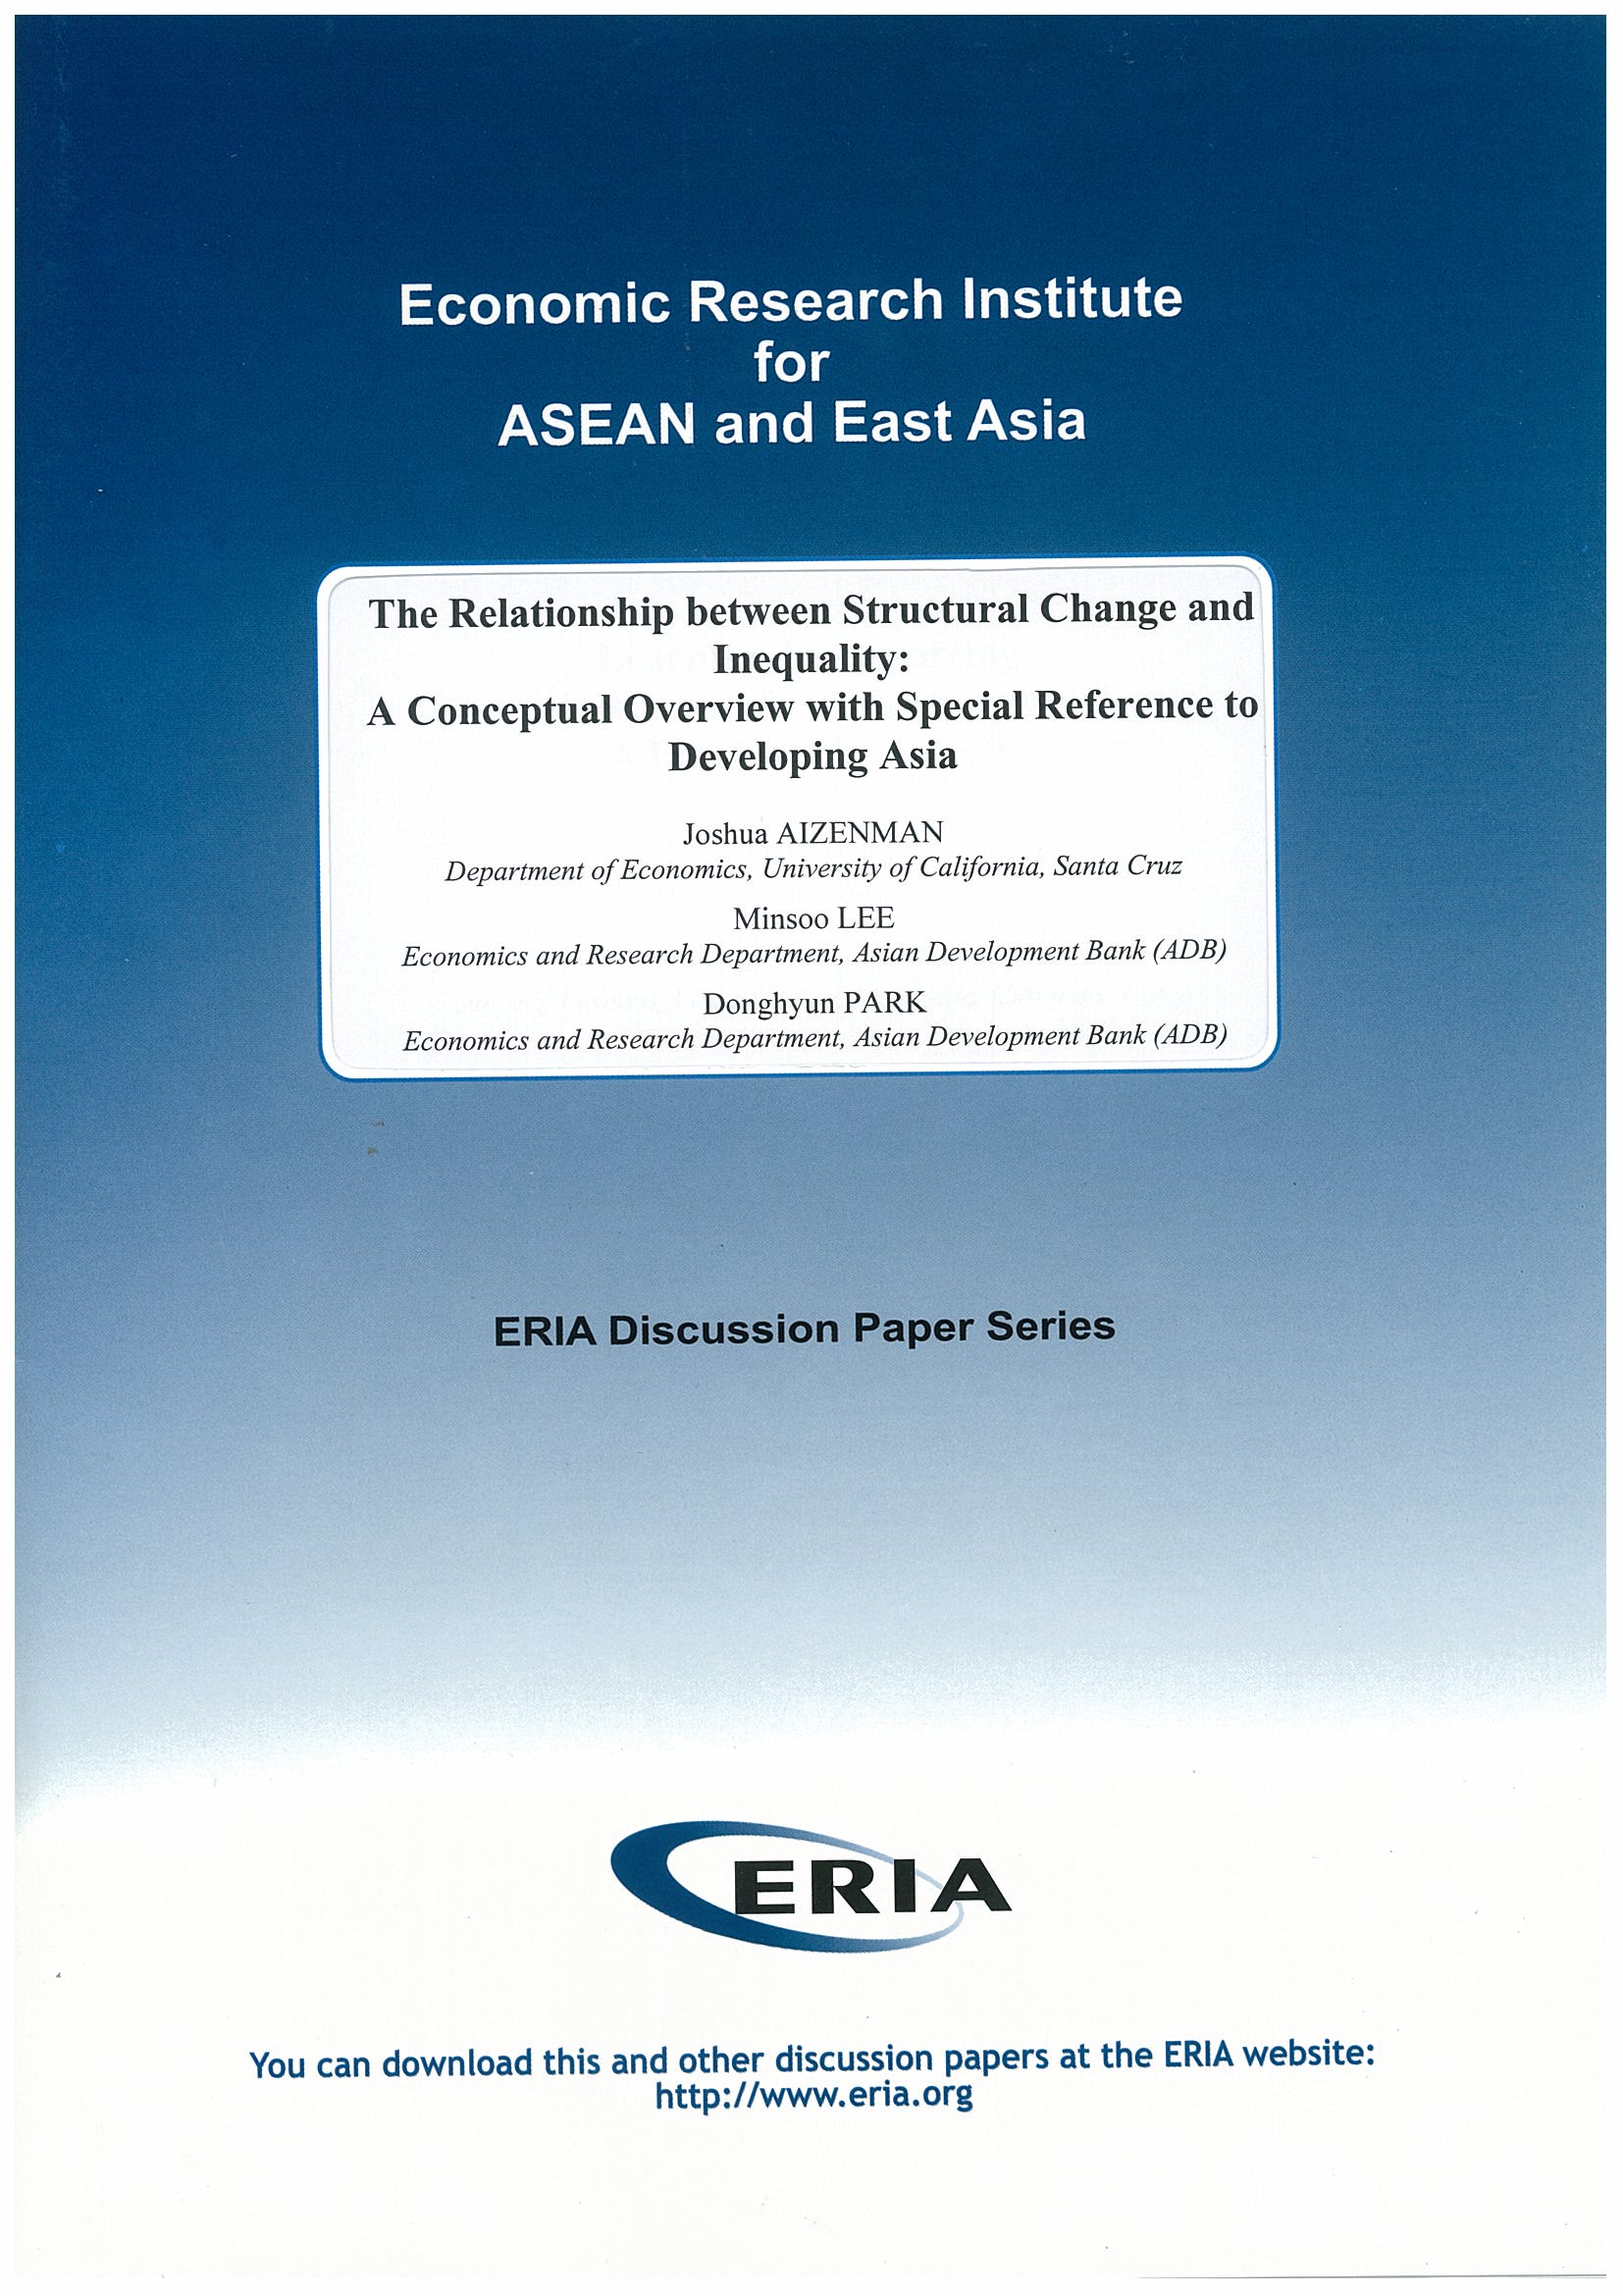 The Relationship between Structural Change and Inequality: A Conceptual Overview with Special Reference to Developing Asia